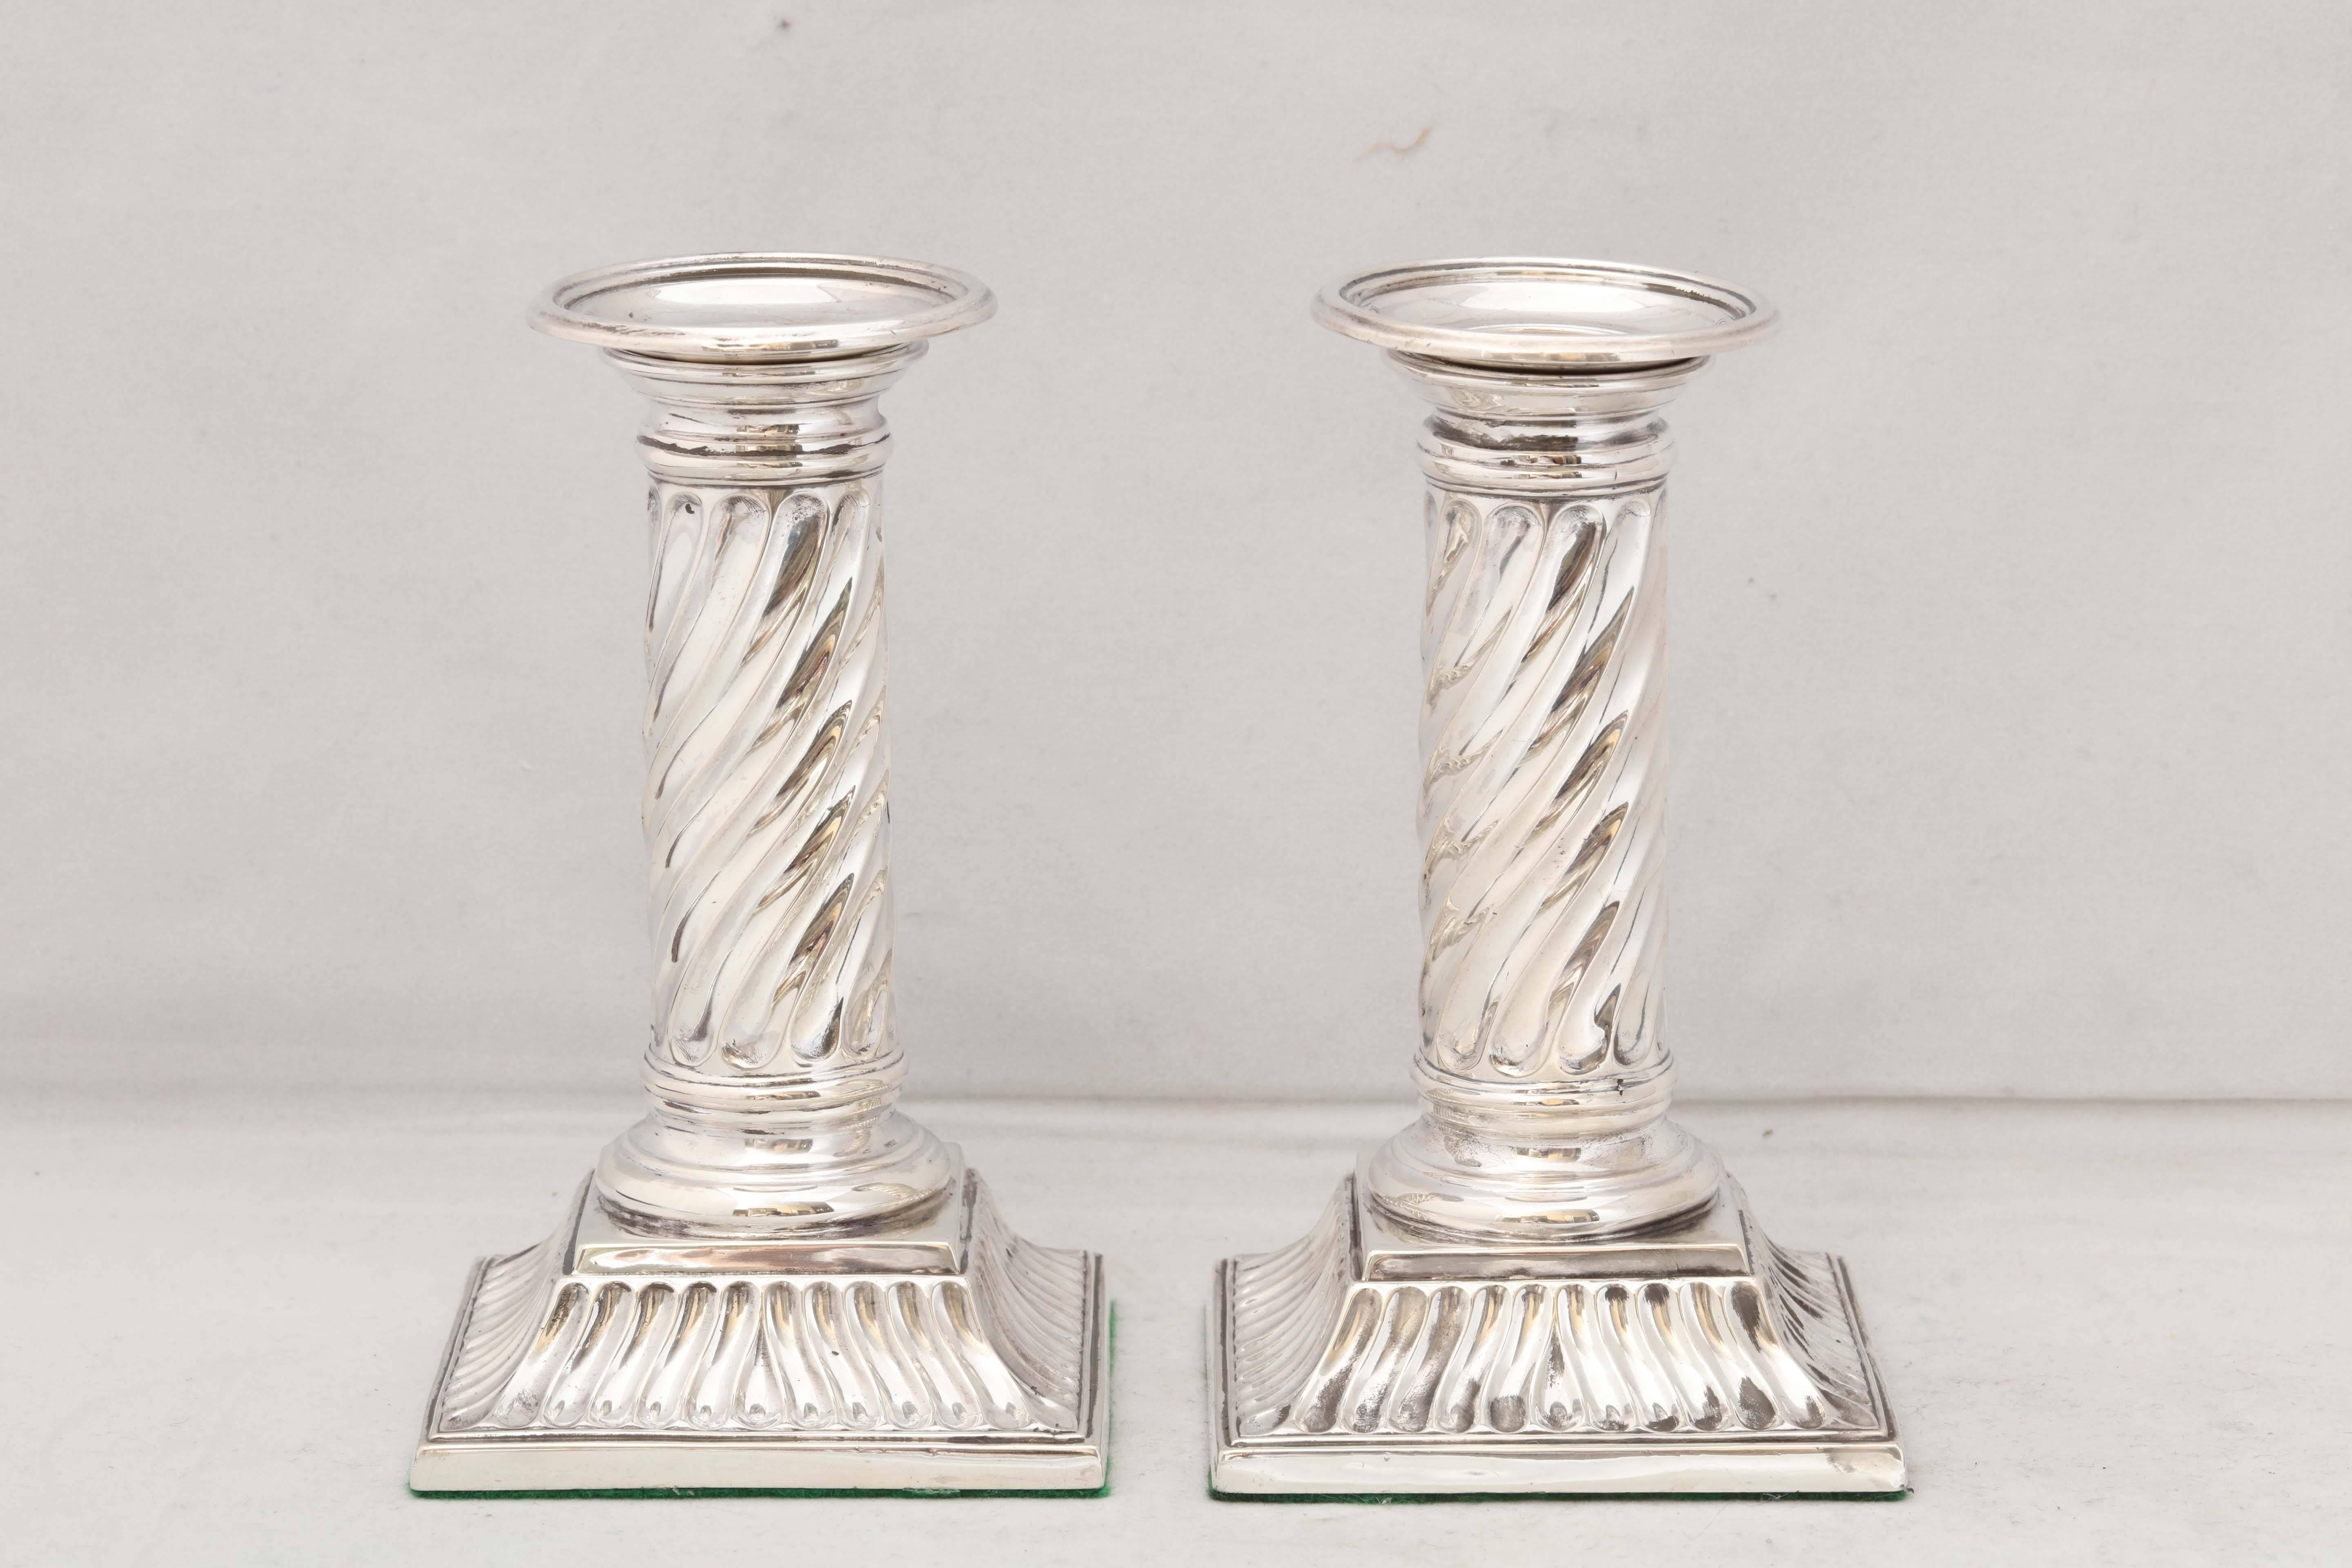 Lovely, unusual pair of Victorian, sterling silver, neoclassical column - form candlesticks, London, 1889, Richard Martin & Ebenezer Hall - makers. Fluted bases. Columns are 